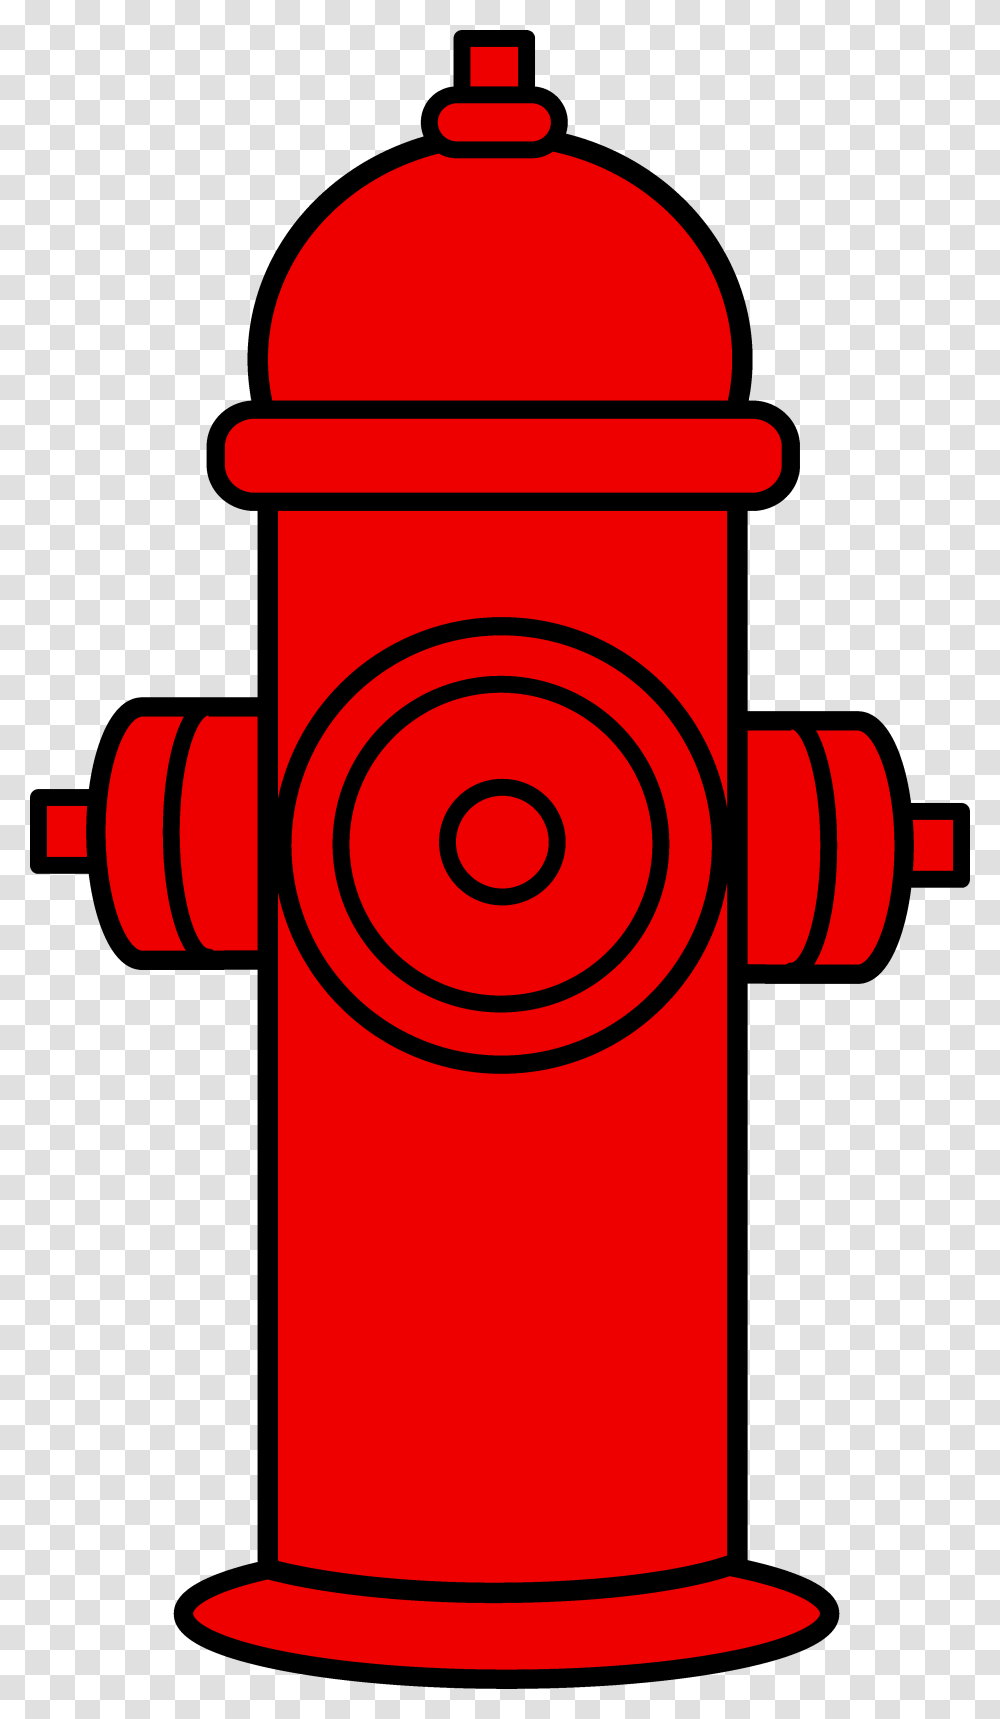 Red Fire Hydrant Punchneedle Fire Truck Paw Patrol, Gas Pump, Machine, Mailbox, Letterbox Transparent Png